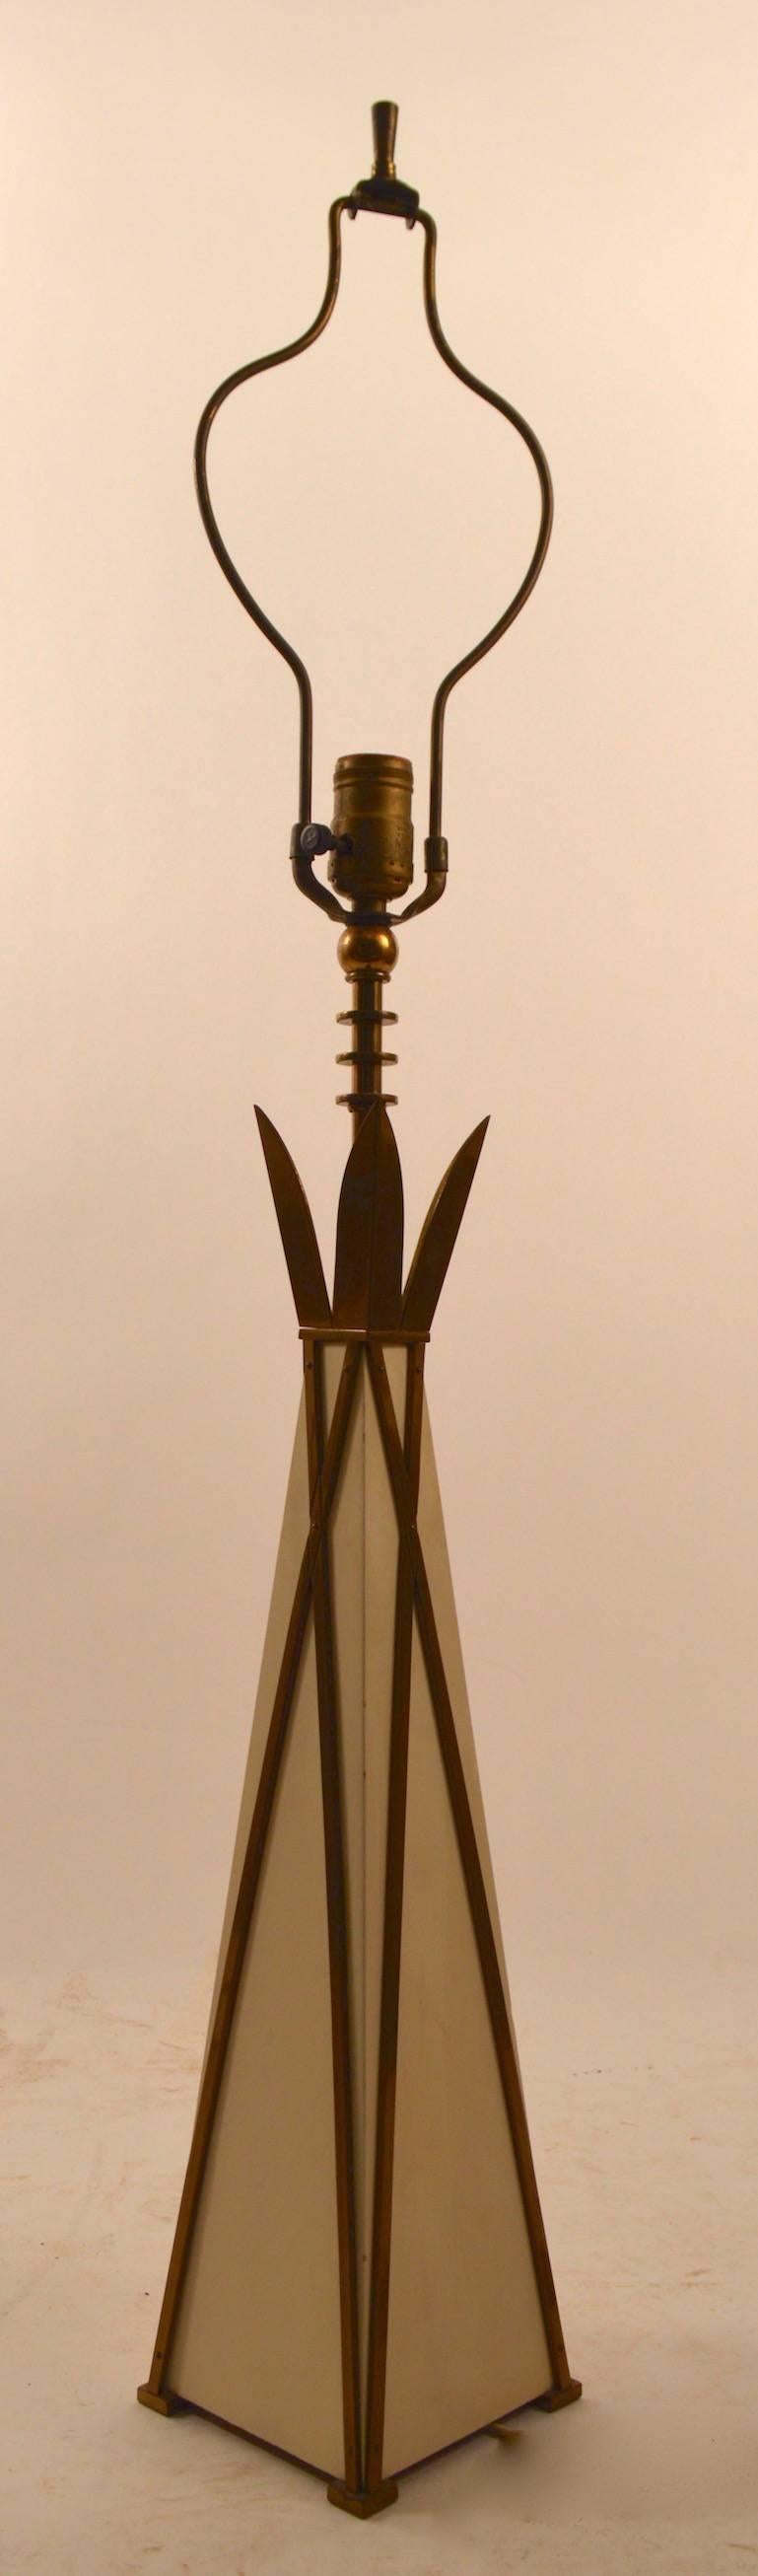 Great stylish pair of table lamps, pyramid form cream lacquer body with decorative brass 